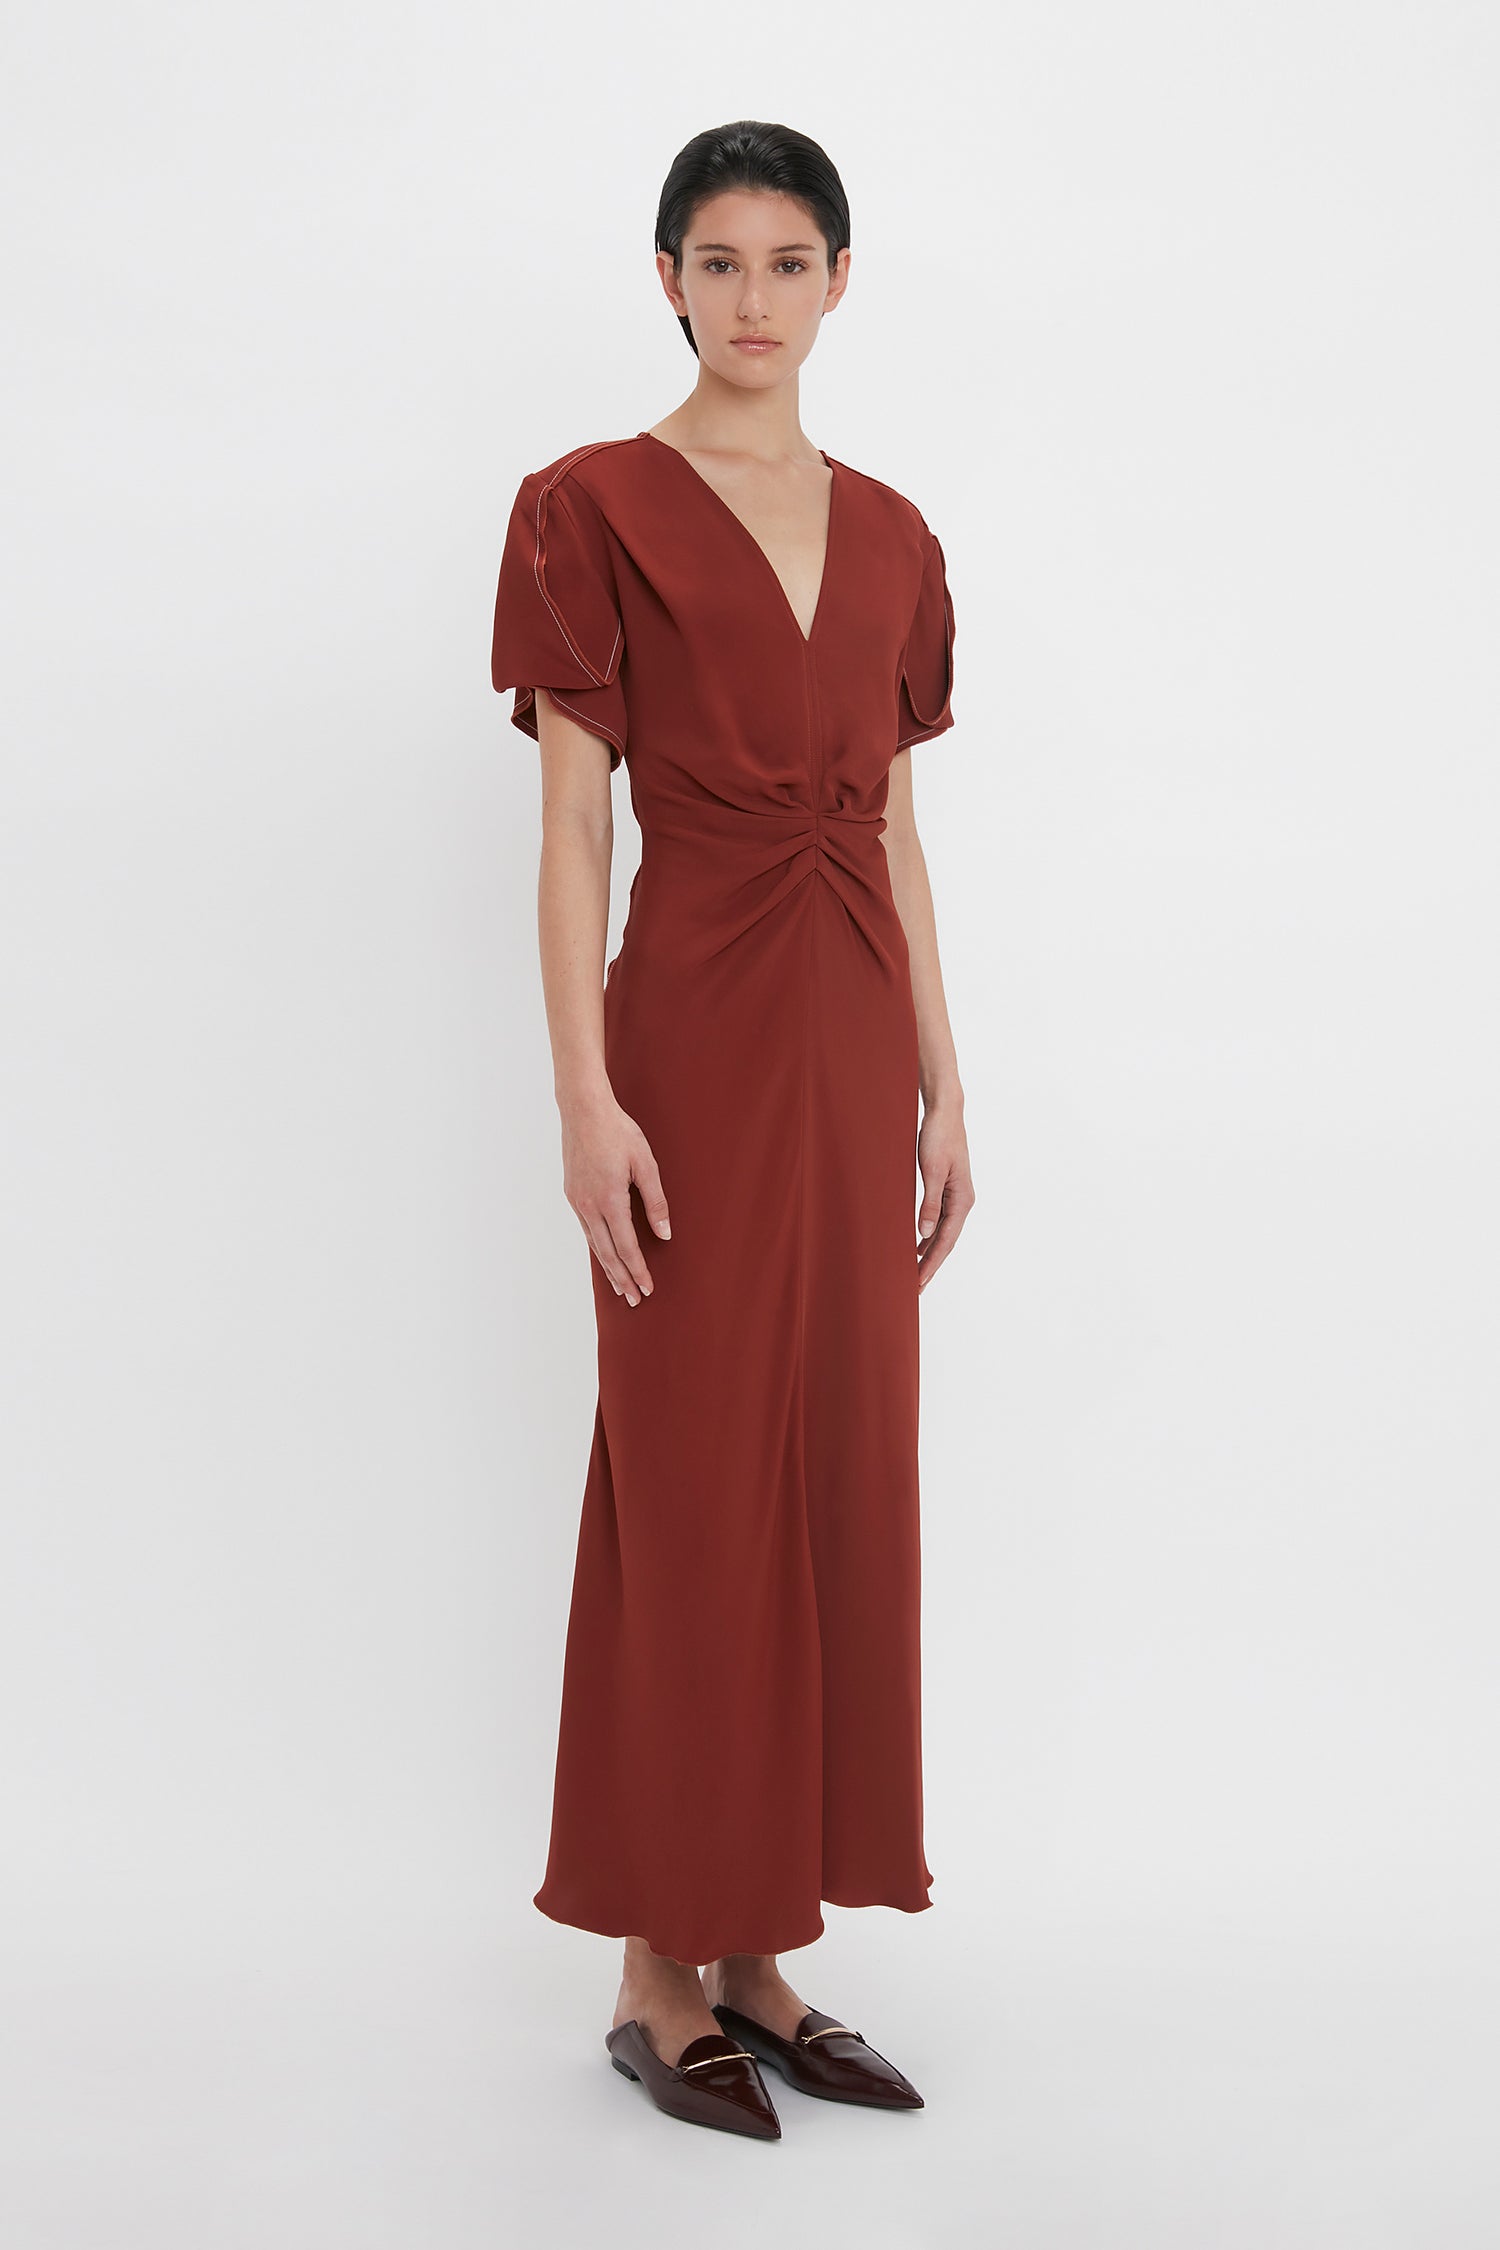 A person stands against a plain background, wearing a rust-colored Gathered V-Neck Midi Dress In Russet by Victoria Beckham with a waist-defining pleat detail and knotted at the waist, paired with dark brown flat shoes.